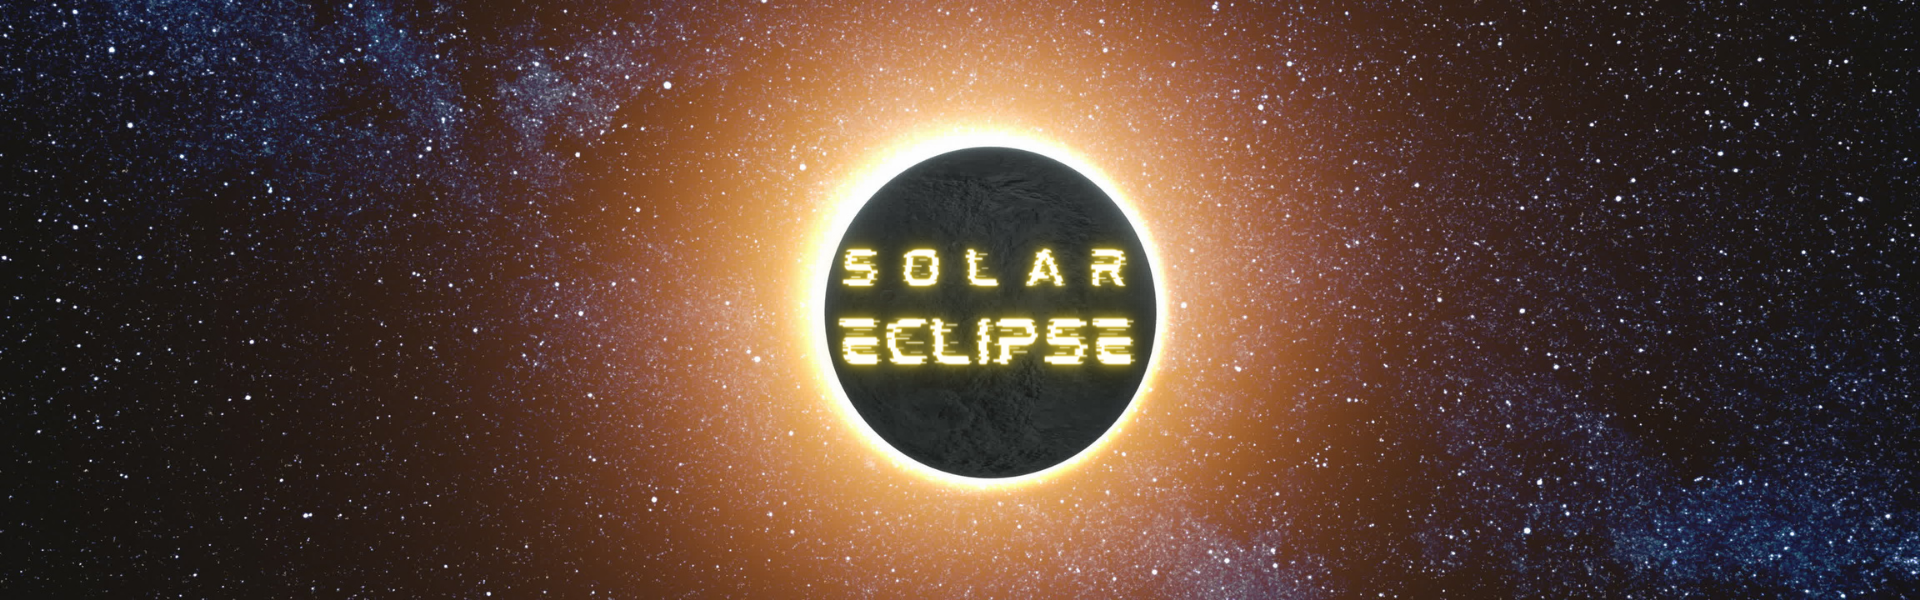 Solar eclipse events